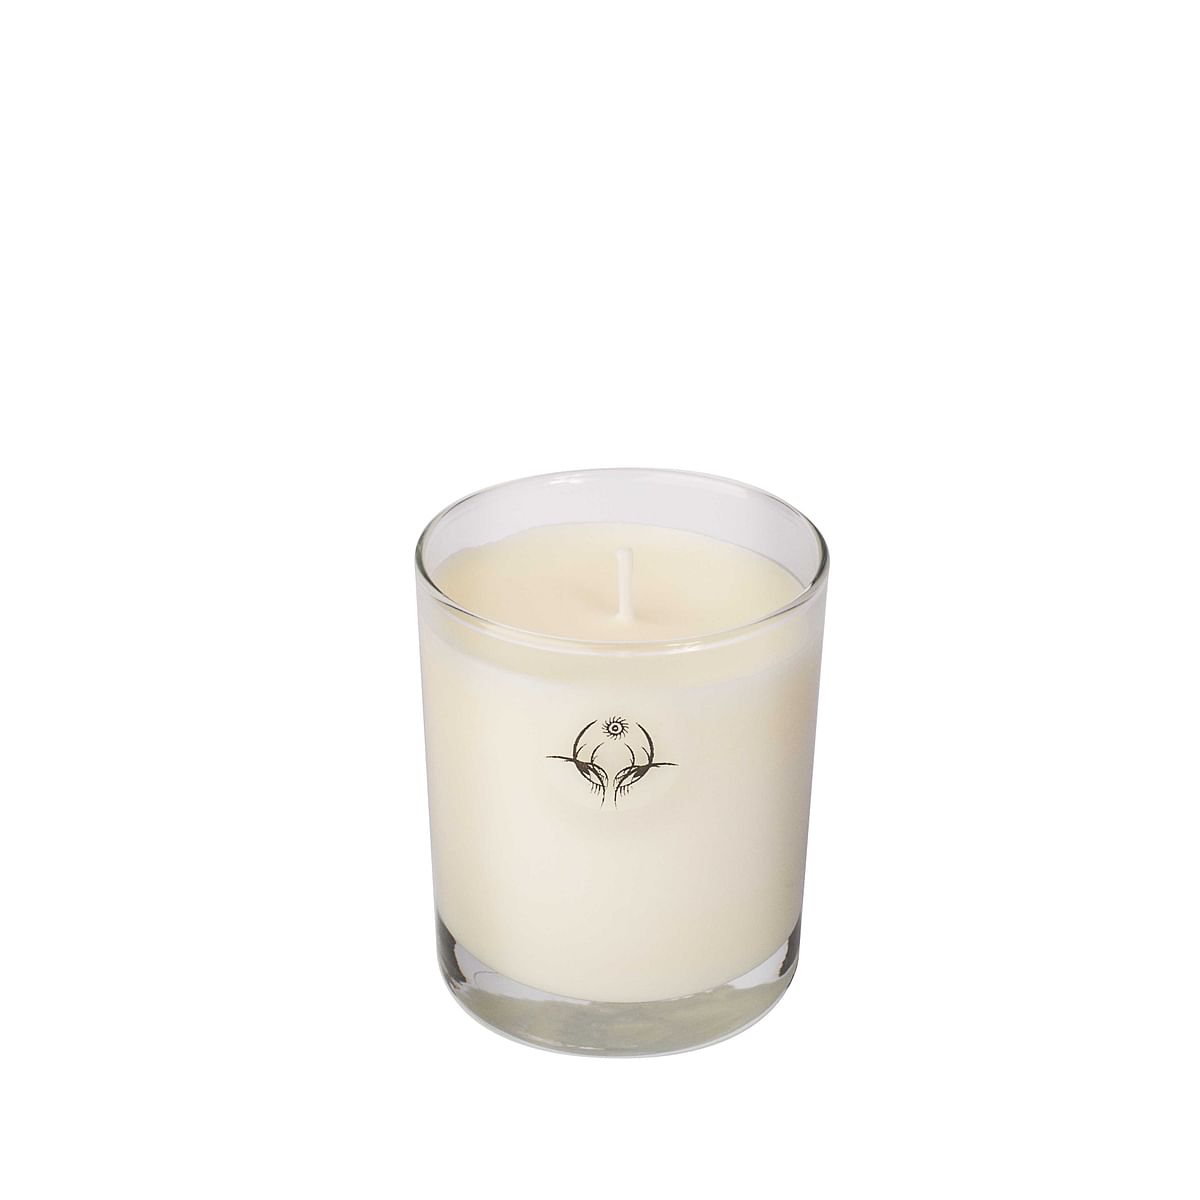 Handmade The Aromatherapy Candle For Attracting the Energy of the Guardian Angel